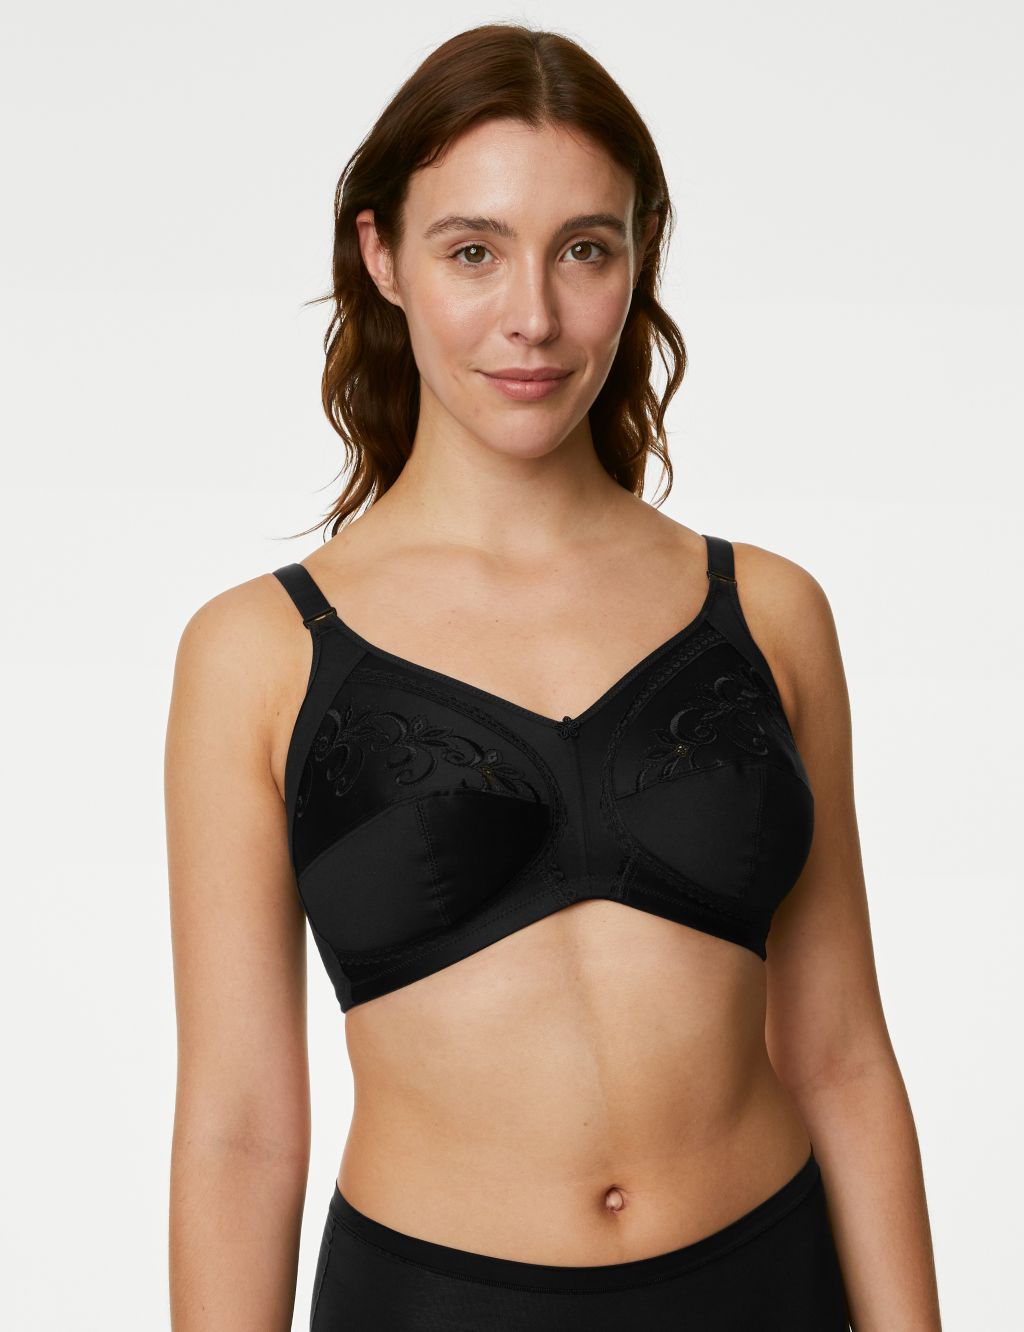 Collection My Luxury S/S 2019 - Strapless bra with graduated cup